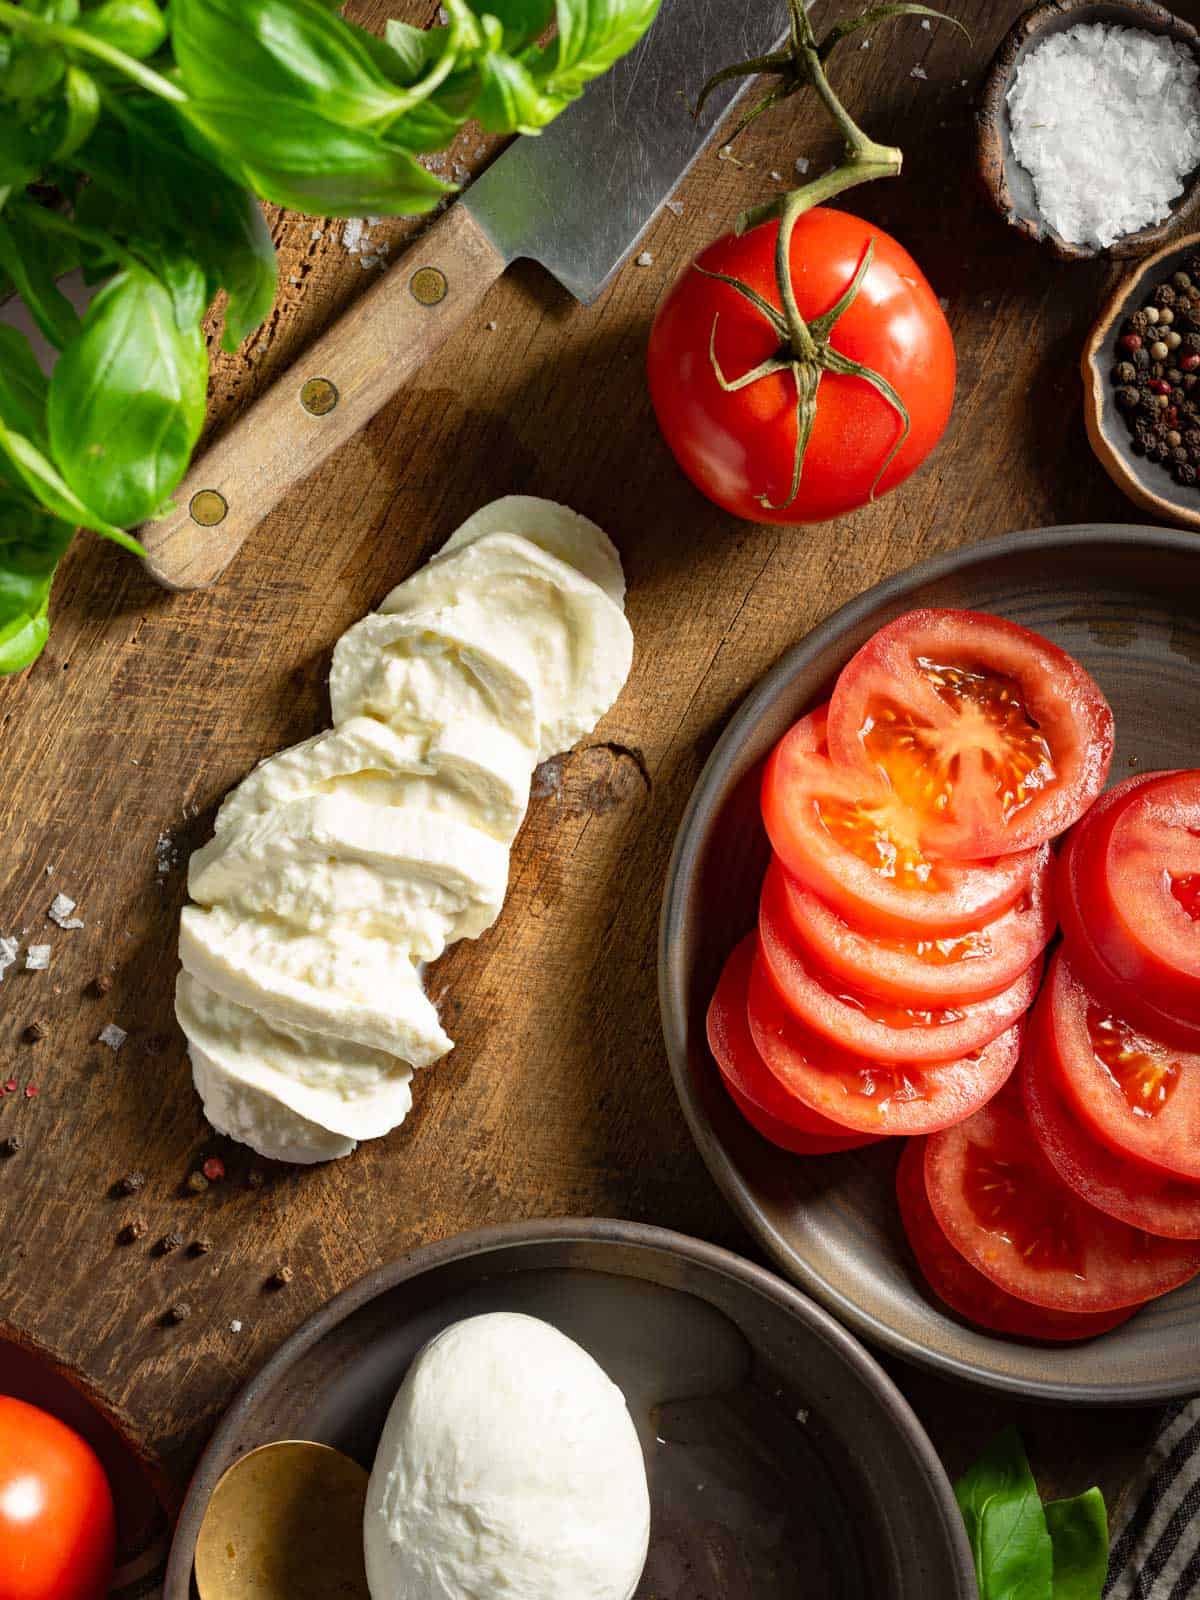 Sliced burrata and tomatoes on a cutting board.